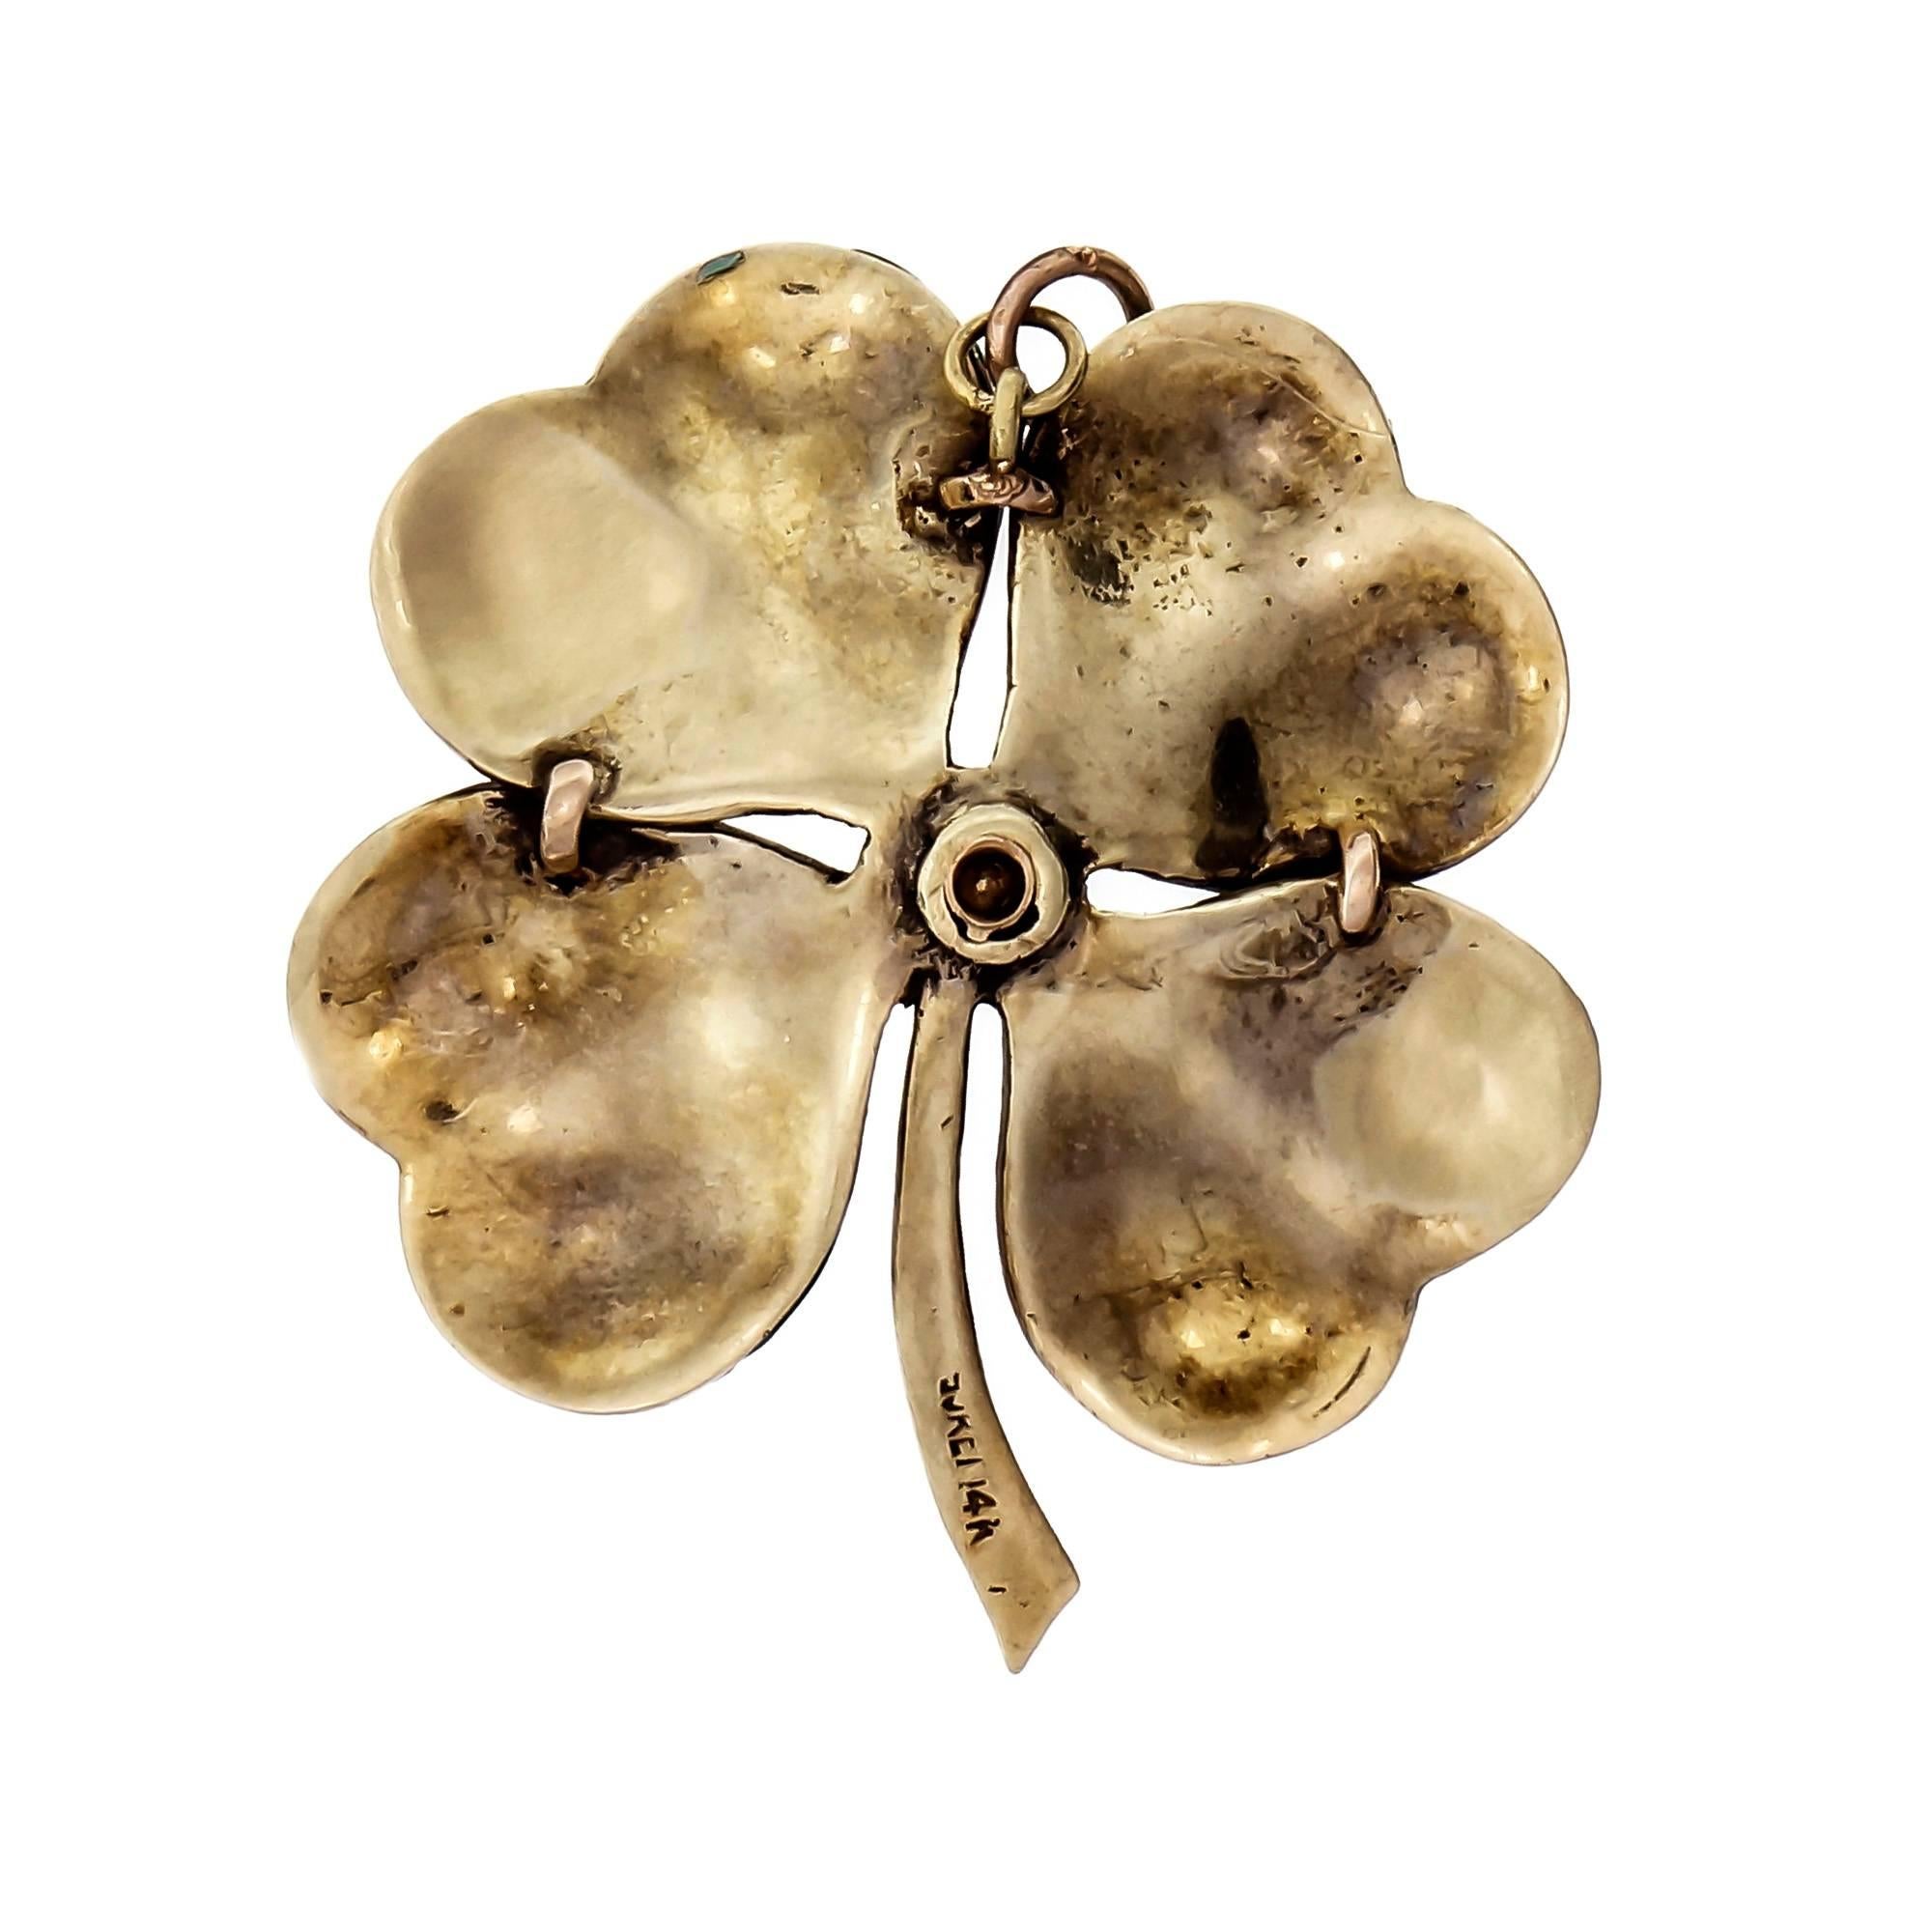 1940-1950 four leaf clover pendant hand enameled set with a brilliant cut Diamond. Made in 14k yellow gold.

1 round brilliant full cut Diamond, approx. total weight .23cts, H, VS2
14k yellow gold
Tested and stamped: 14k
19.9 grams
Top to bottom: